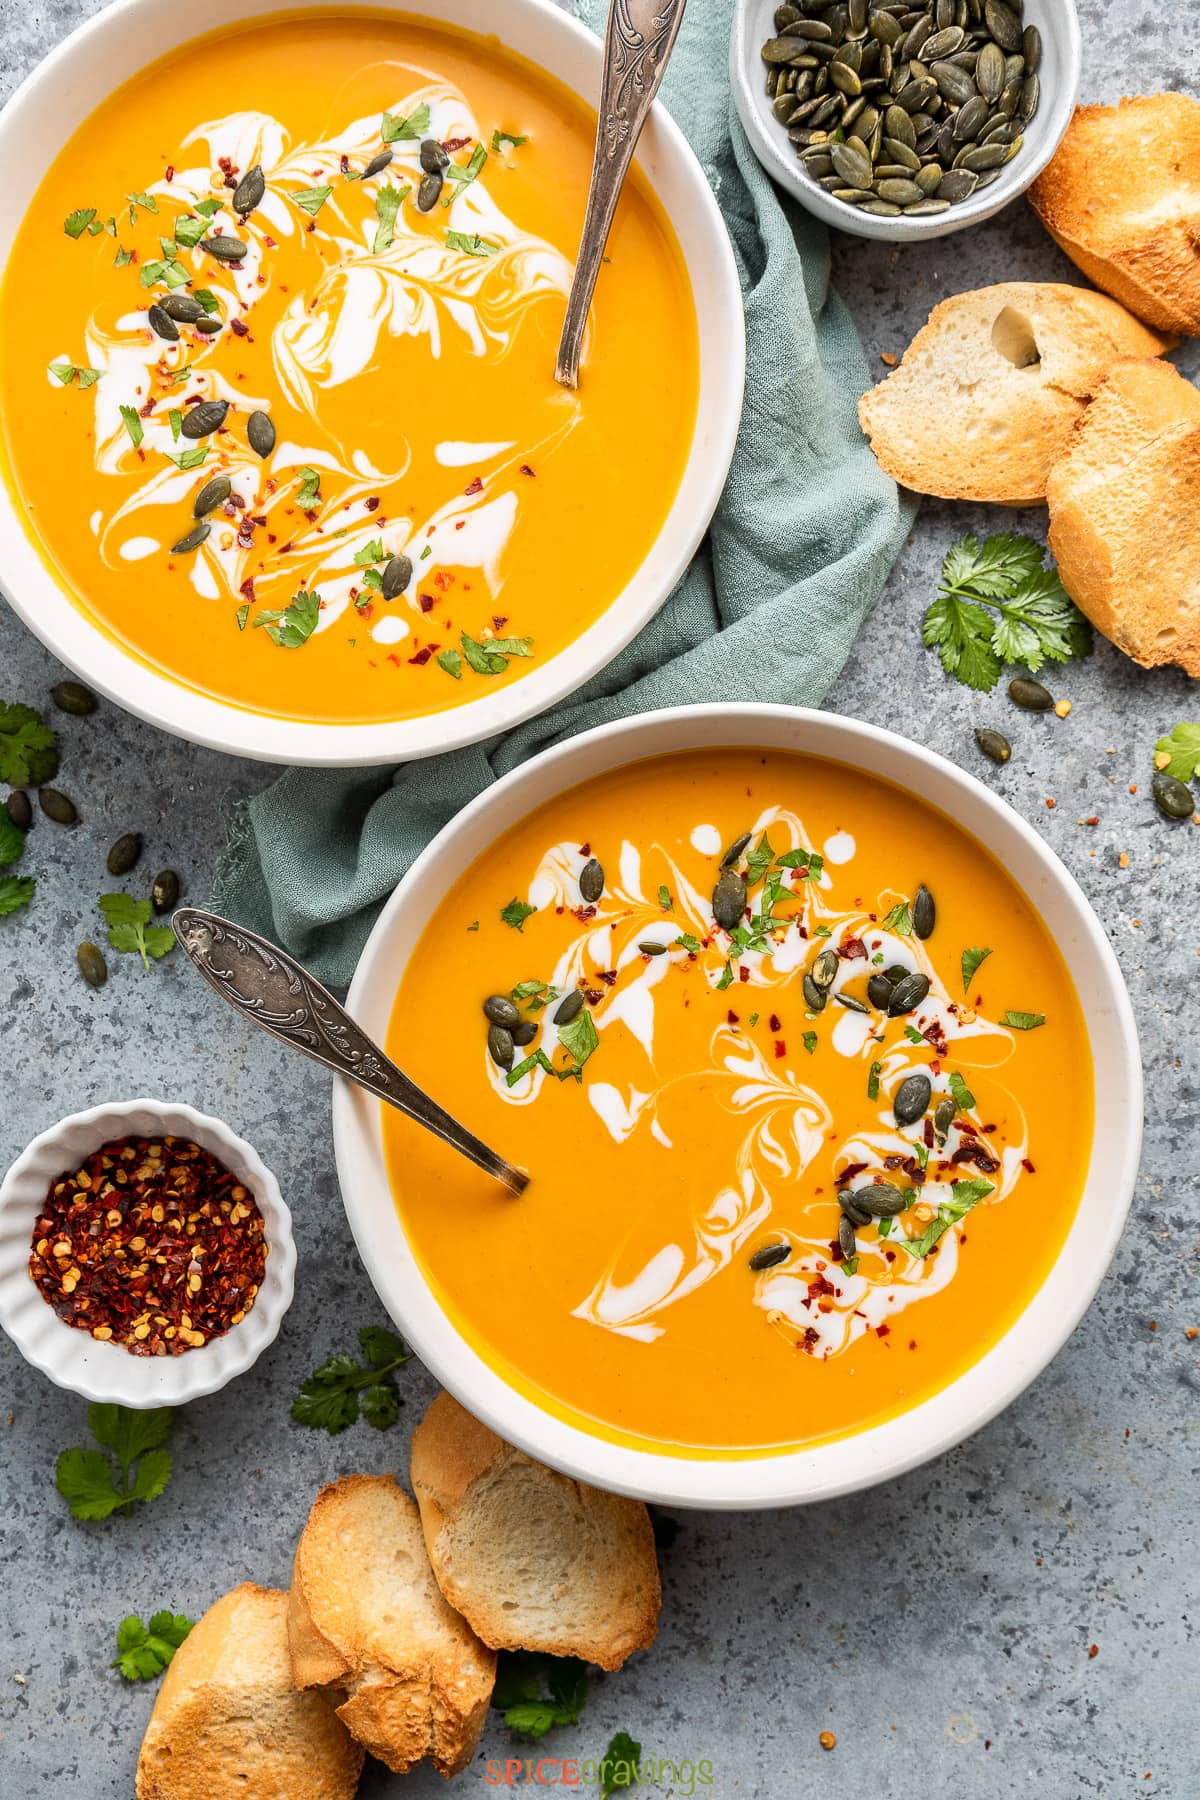 two bowls of curried butternut squash soup garnished with seeds, herbs and coconut milk